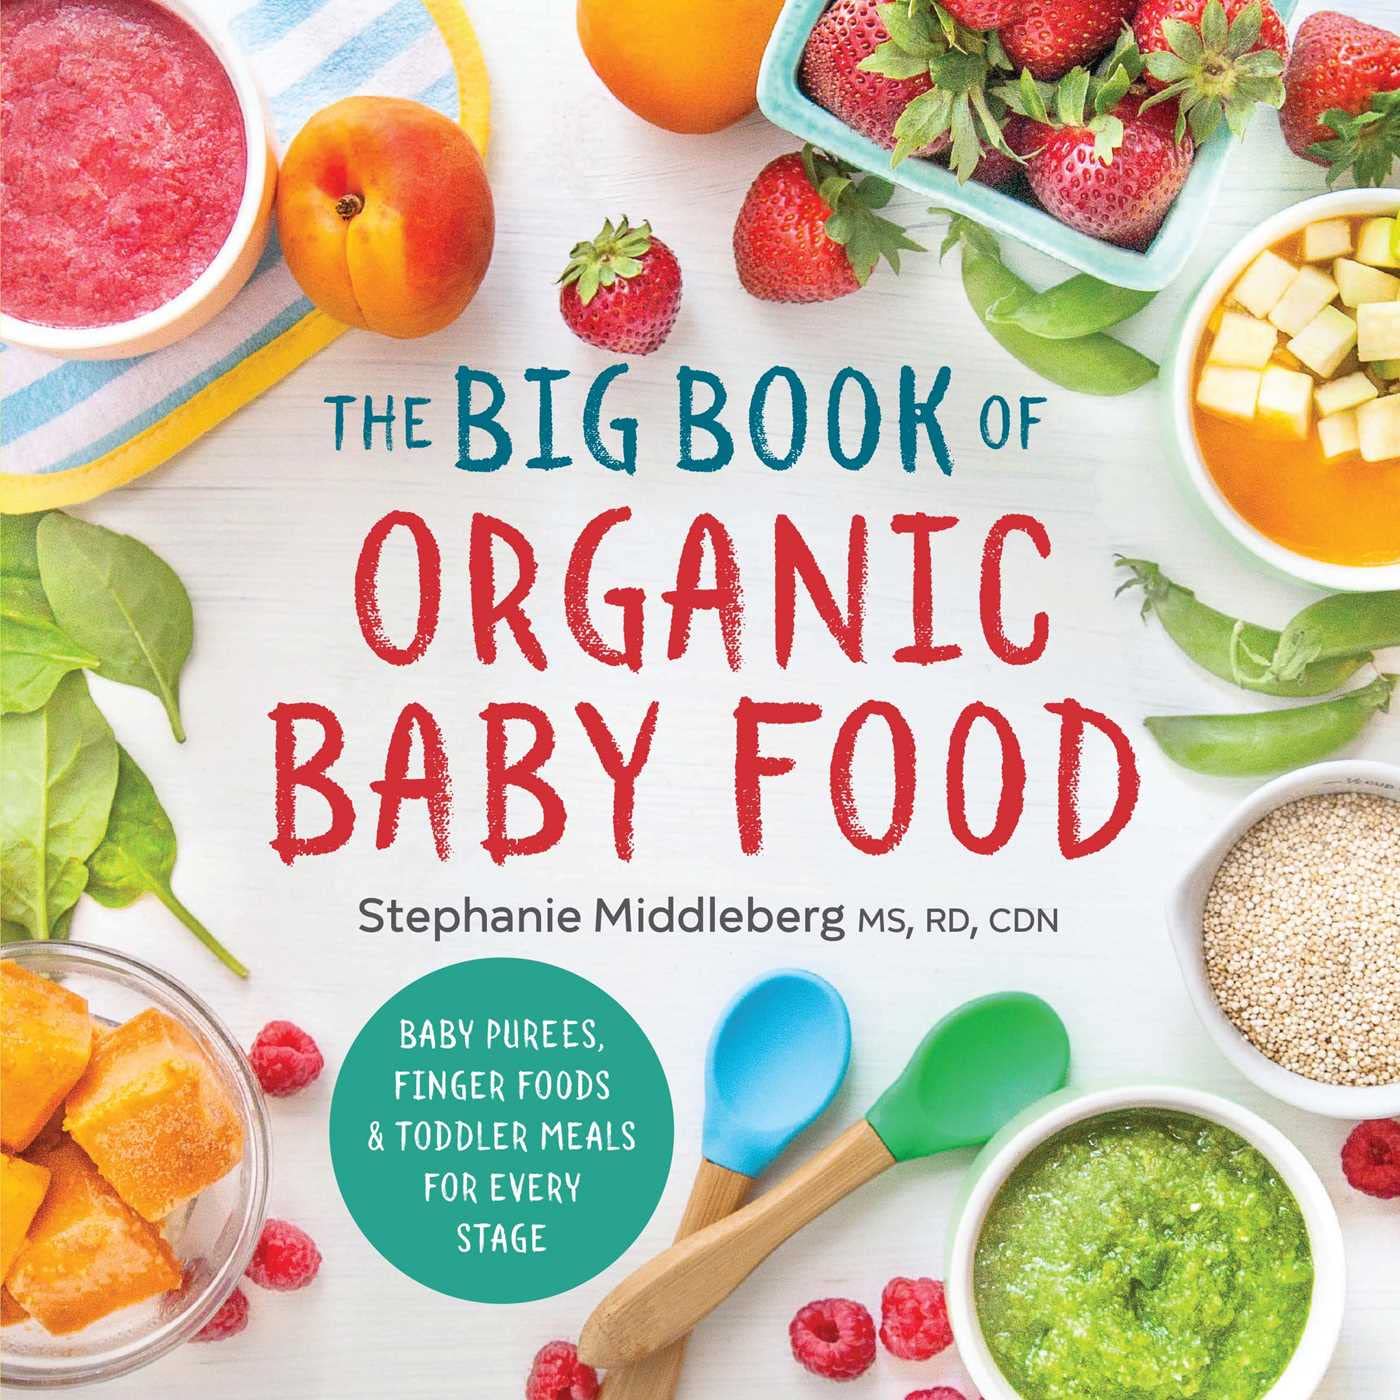 The Big Book of Organic Baby Food: Baby Purées, Finger Foods, and Toddler Meals For Every Stage (Organic Foods for Baby and Toddler)